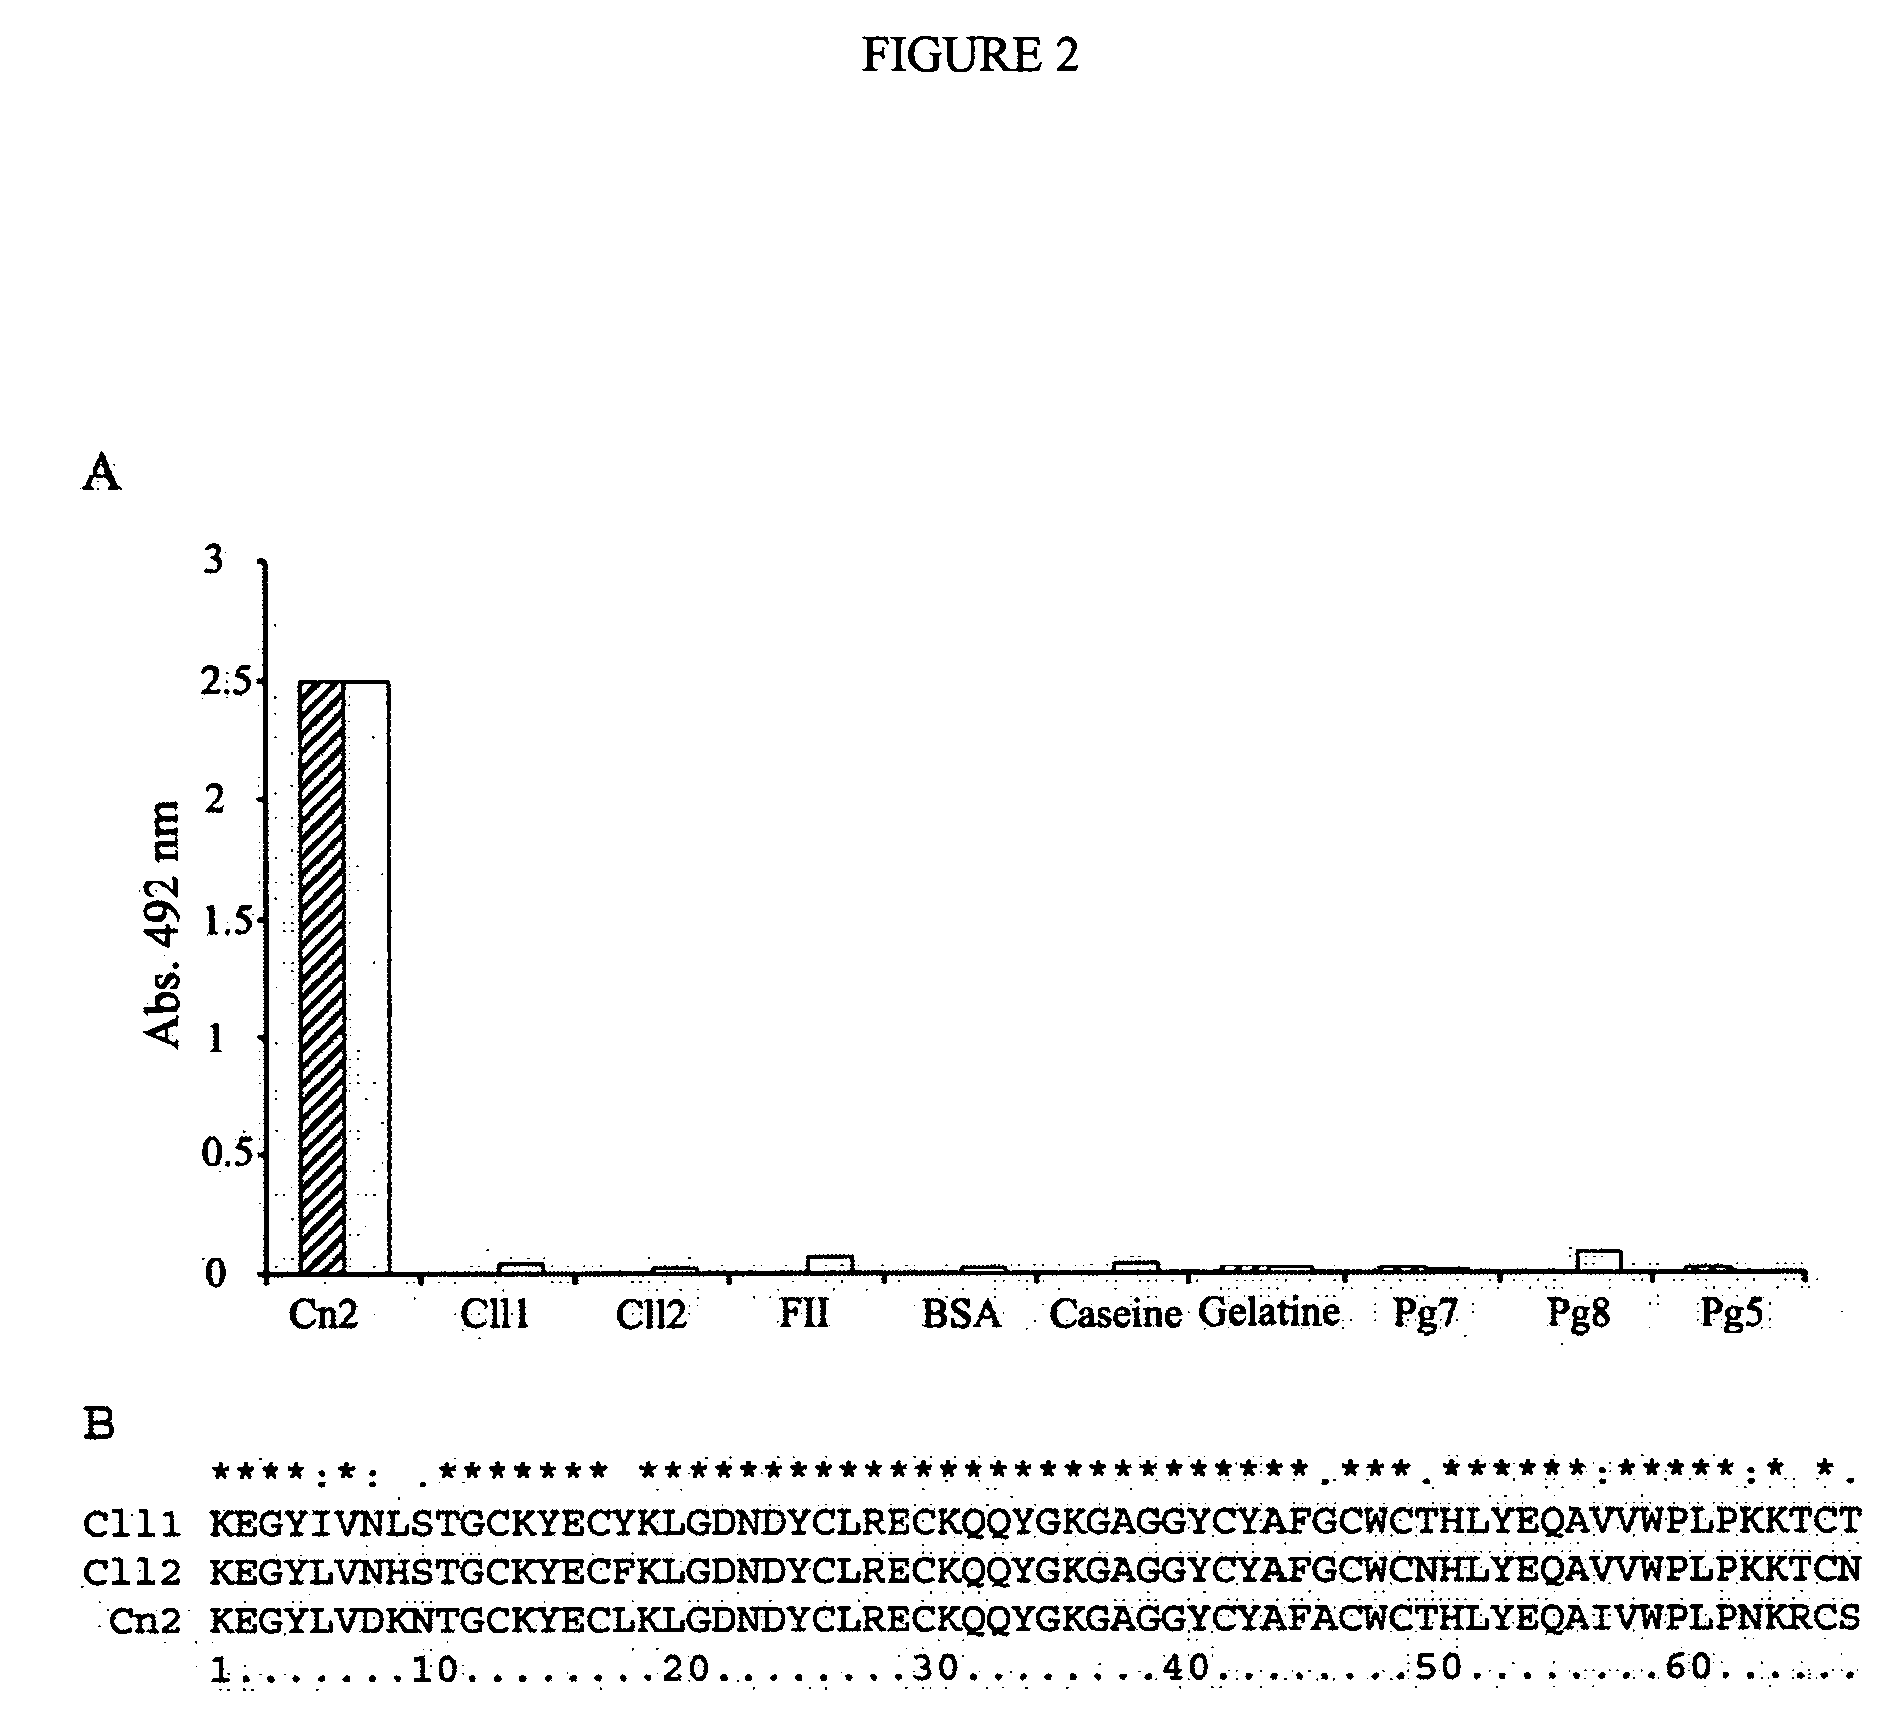 Human antibodies that specifically recognize the toxin Cn2 from Centruroides noxius scorpion venom